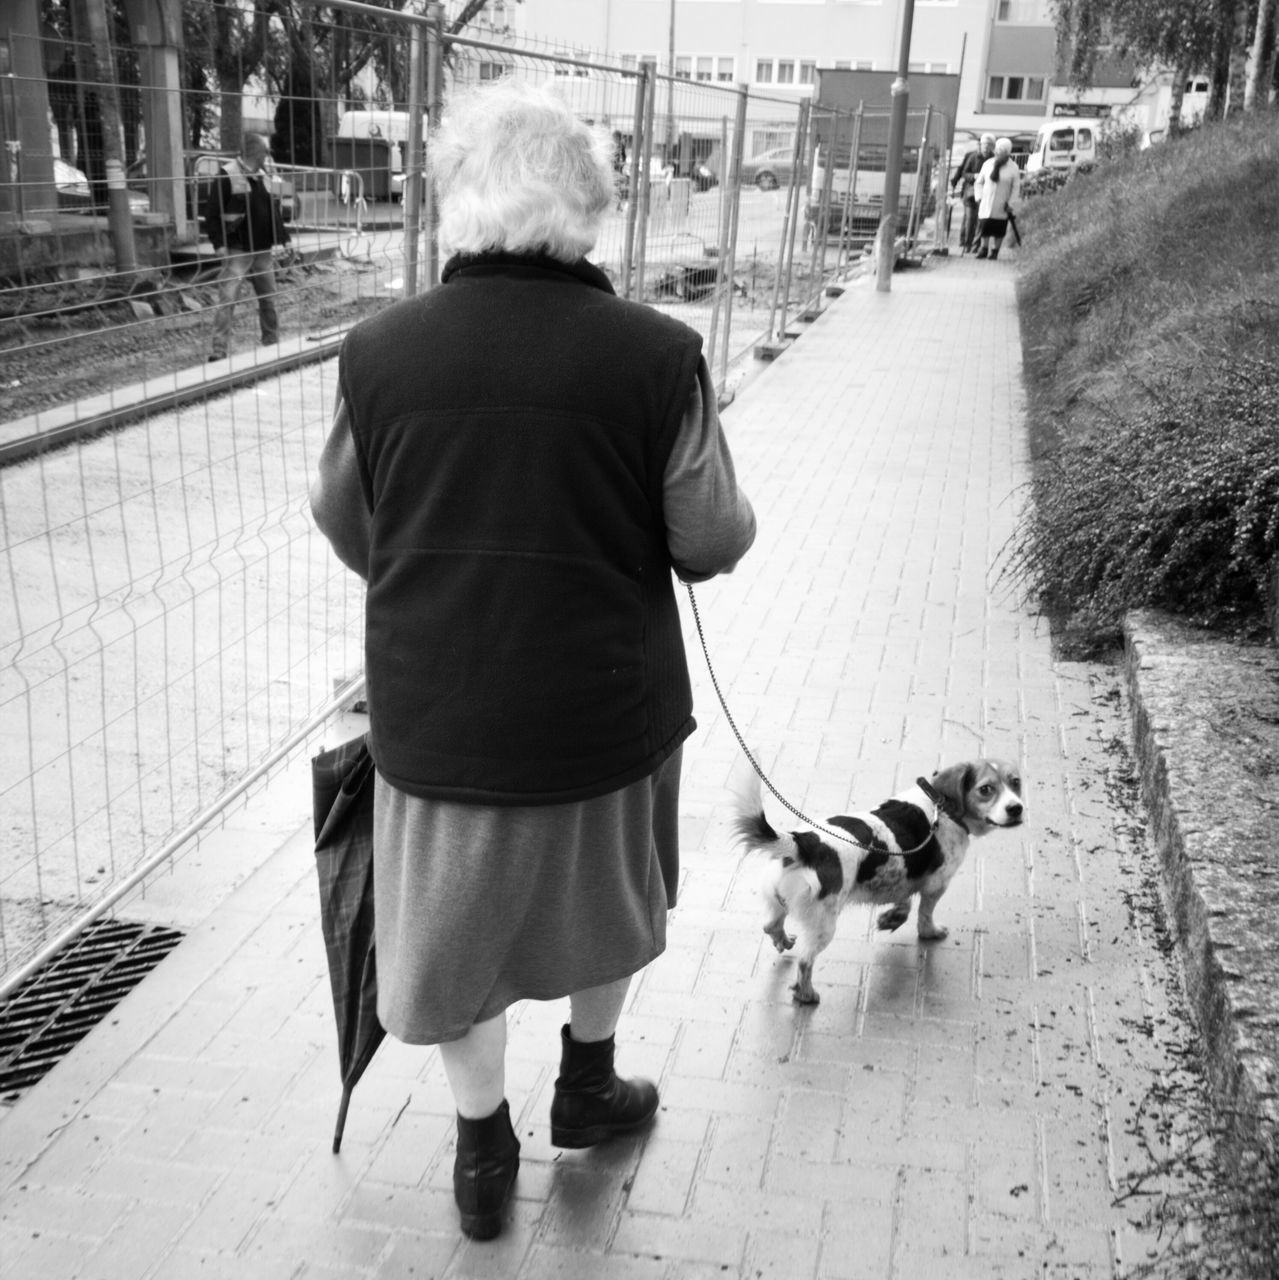 lifestyles, full length, animal themes, street, one animal, pets, domestic animals, rear view, leisure activity, walking, dog, casual clothing, mammal, men, sidewalk, incidental people, city